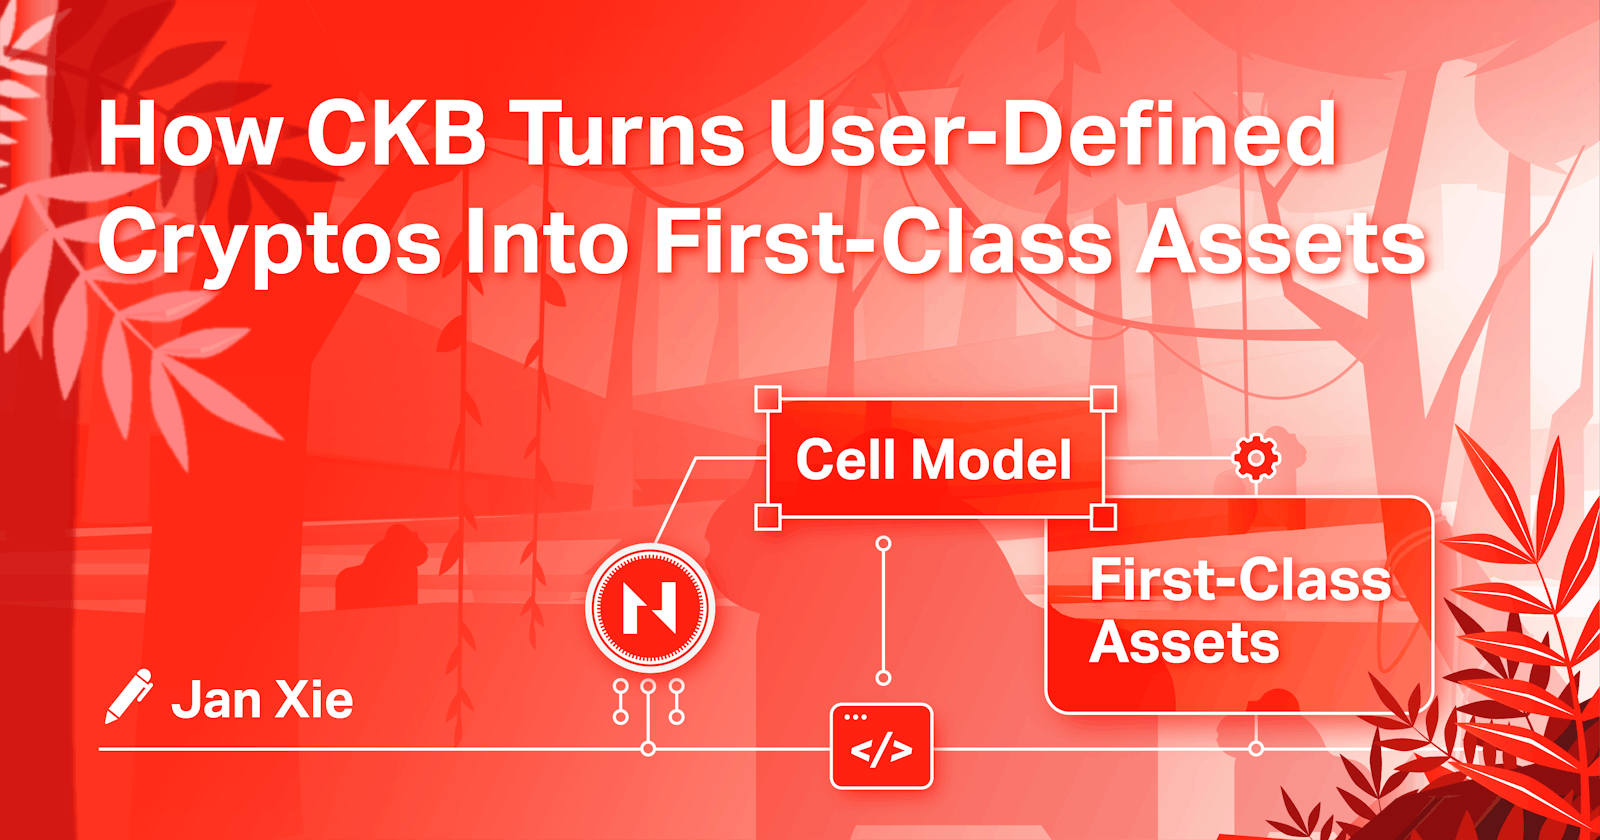 How CKB Turns User Defined Cryptos Into First-Class Assets